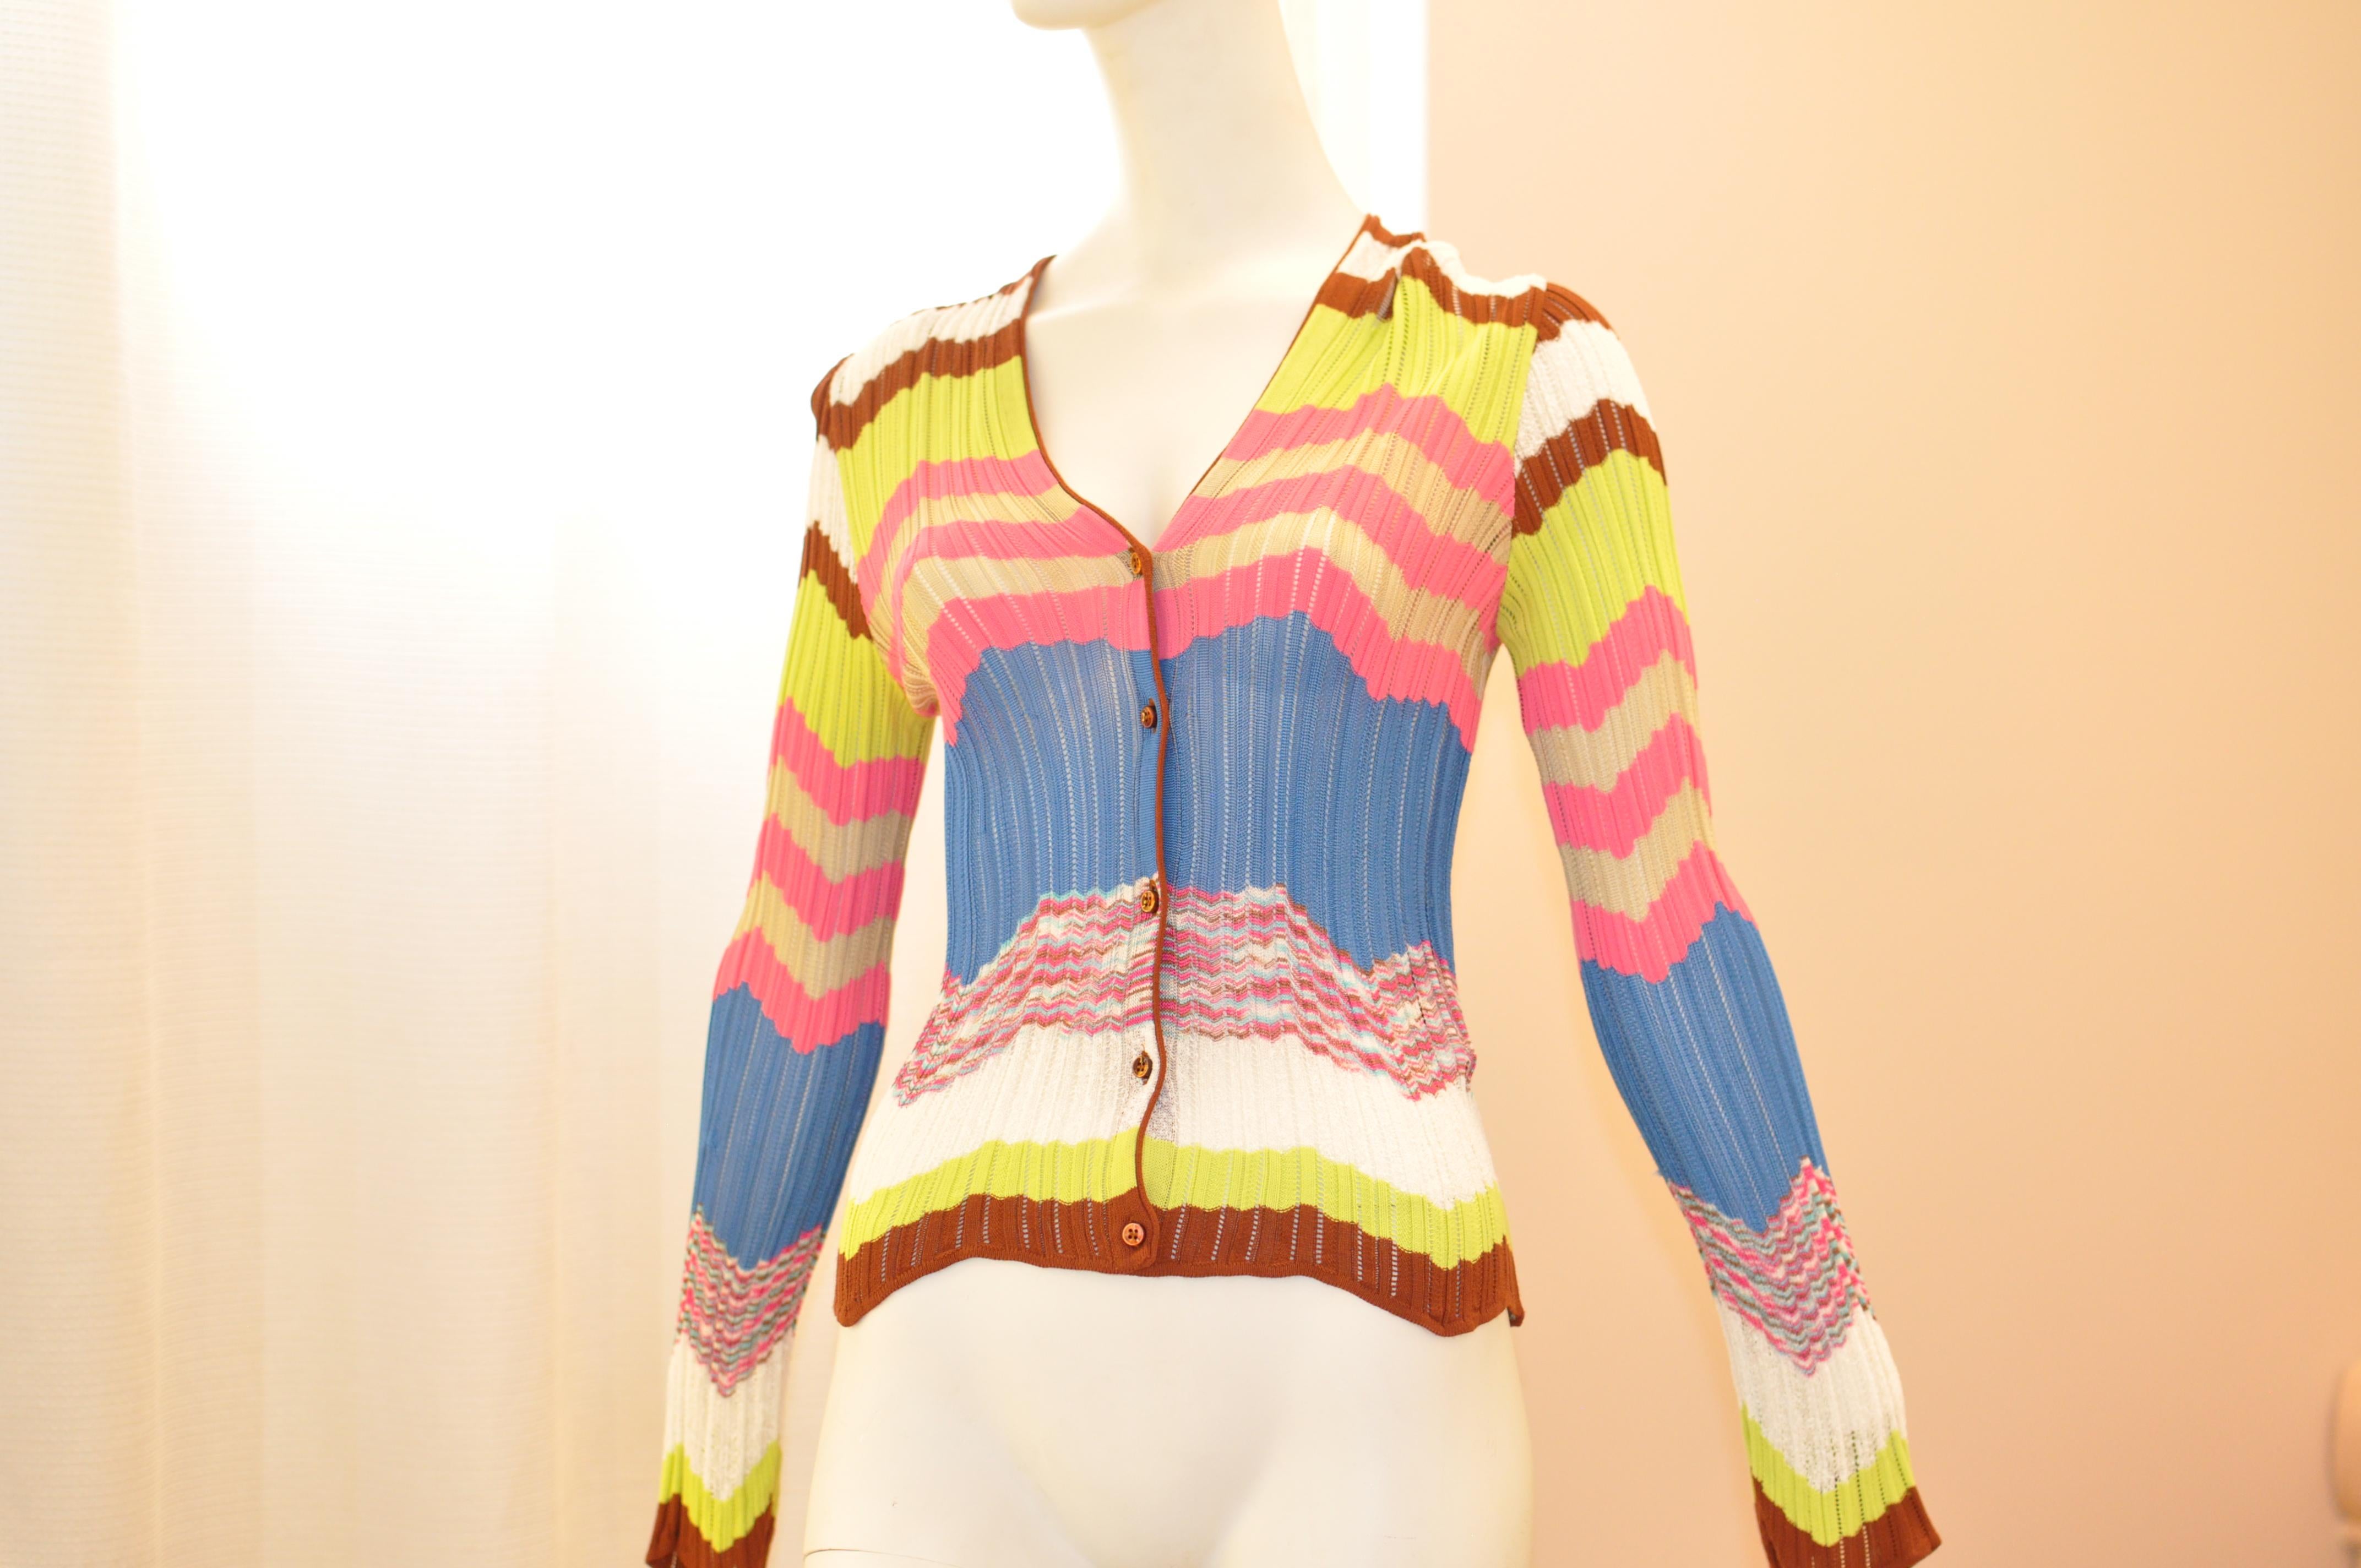 A burst of color which will enliven any outfit. The viscose cardigan has a number of zig zag patterns interspersed with solid colors. The sleeves are long and have handkerchief hems.